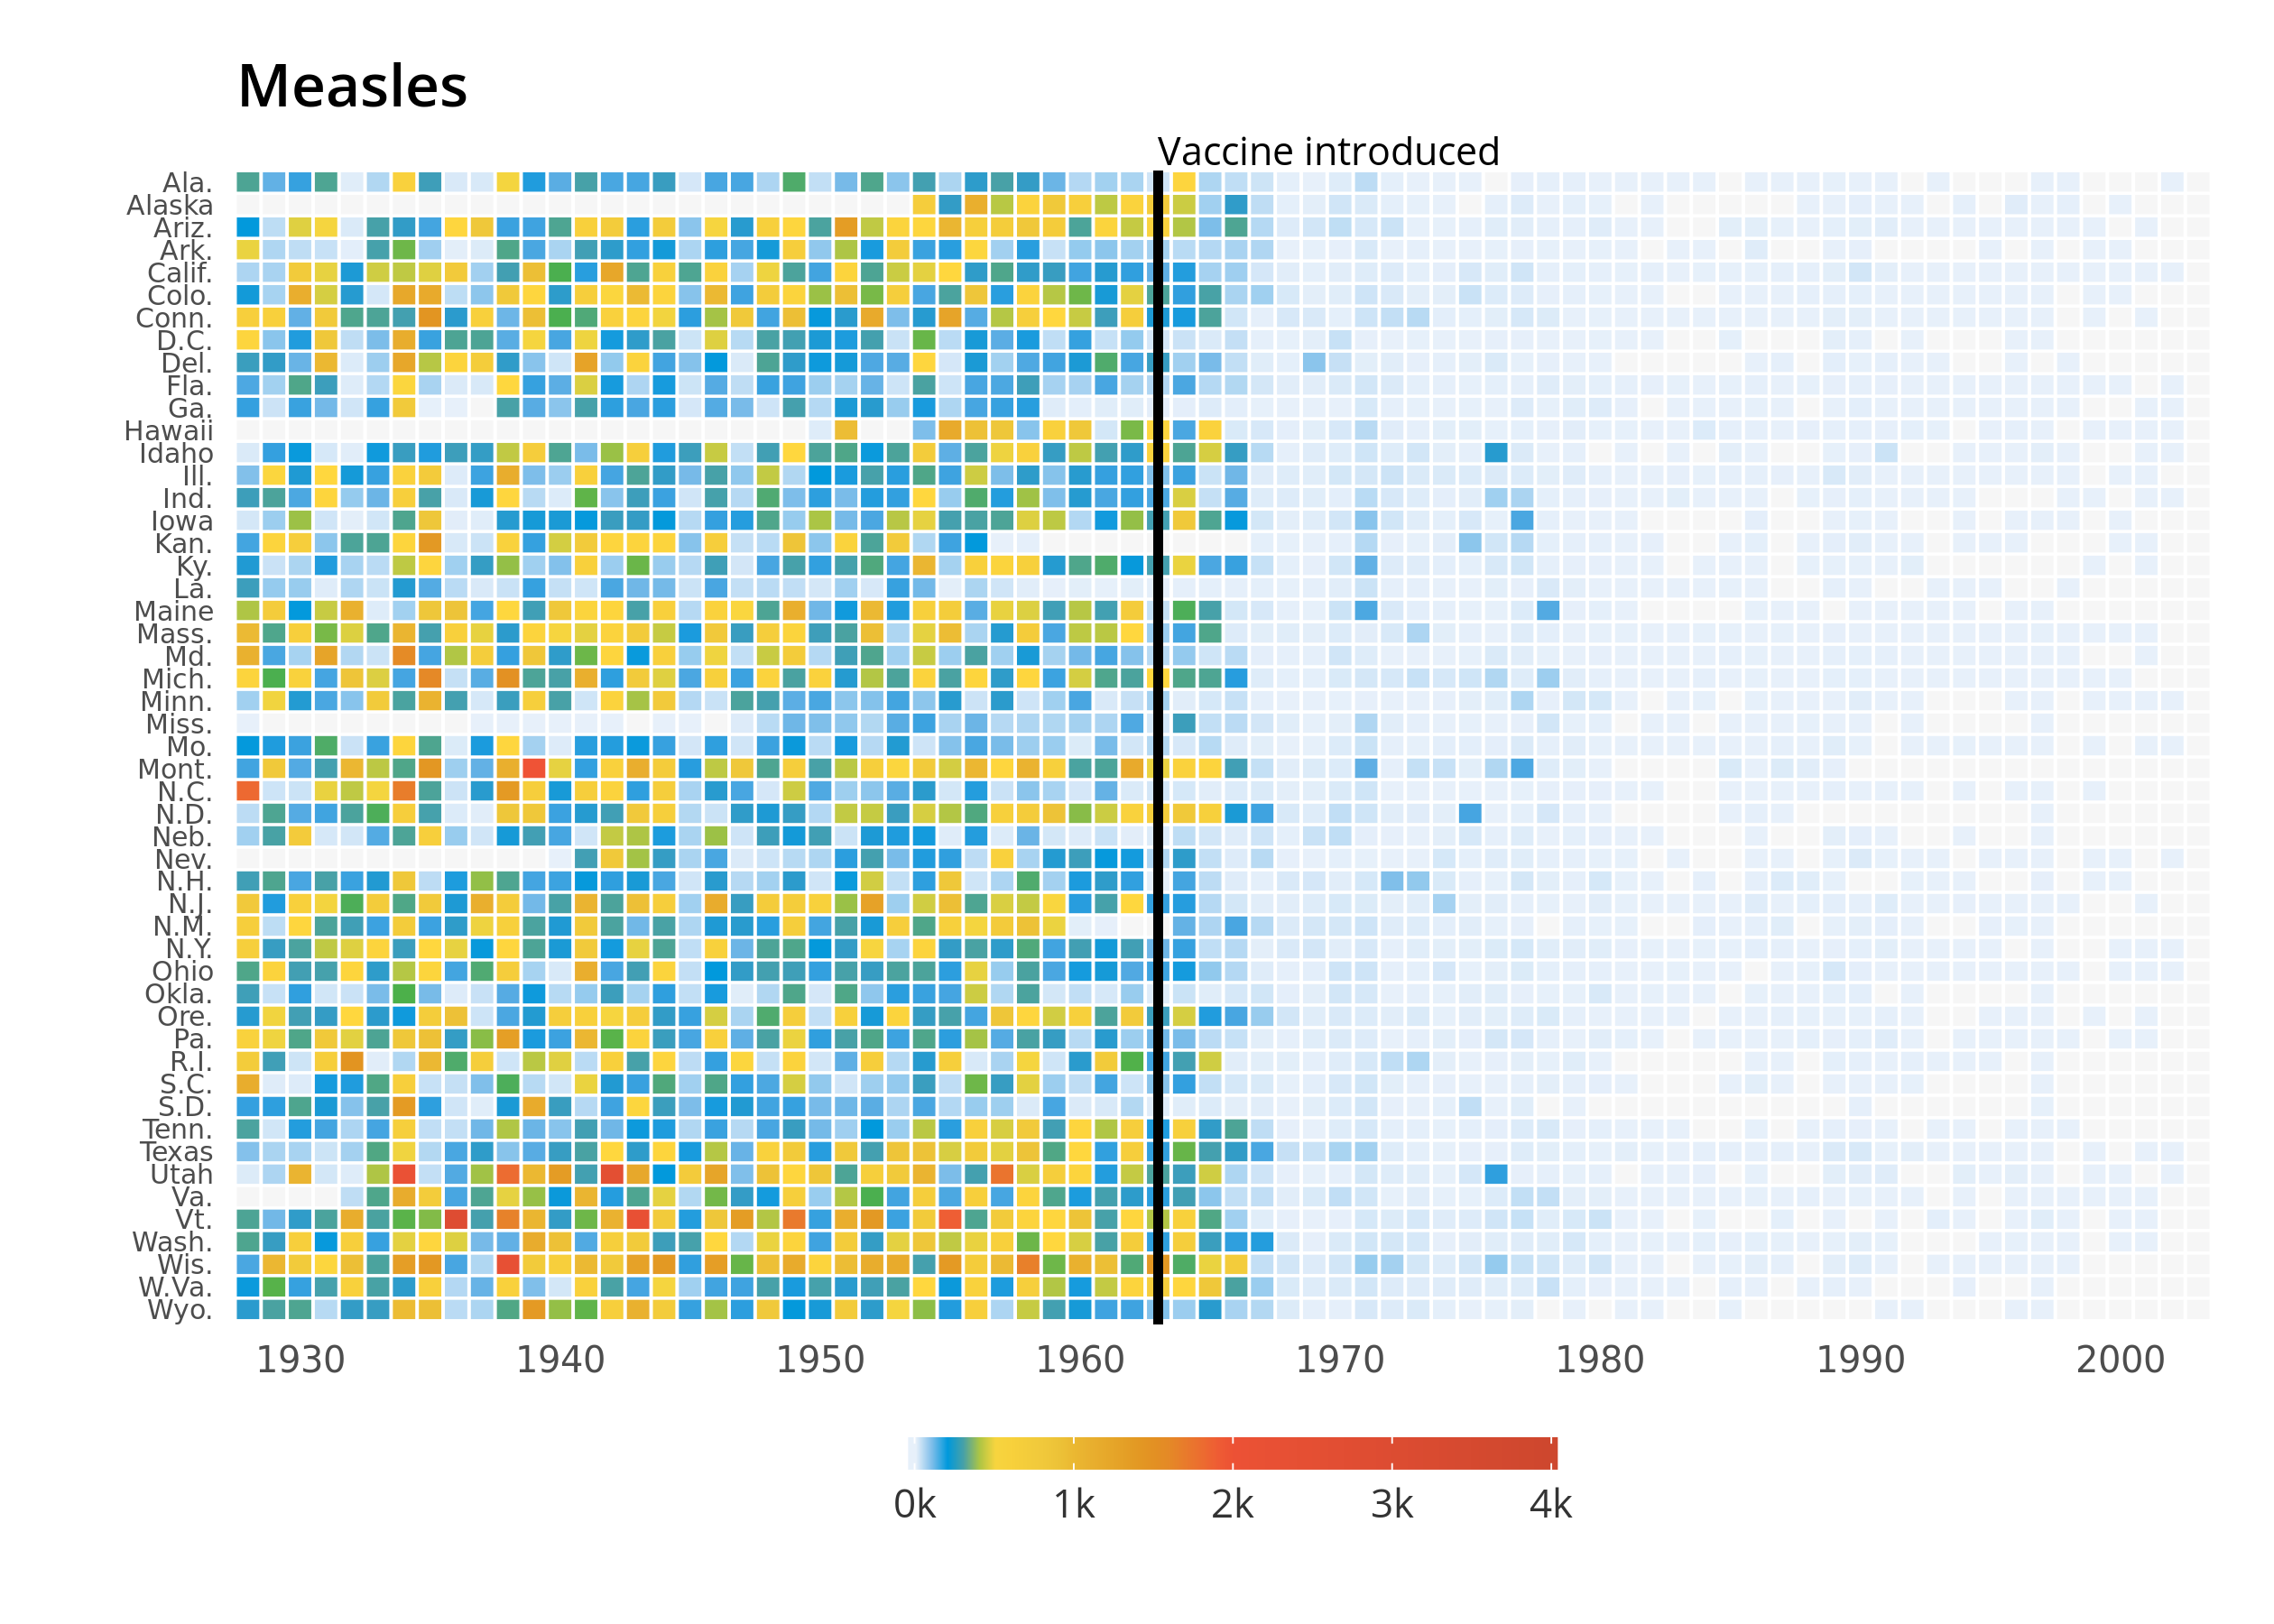 Project img for Reproducing the WSJ Measles Vaccination Chart Using R